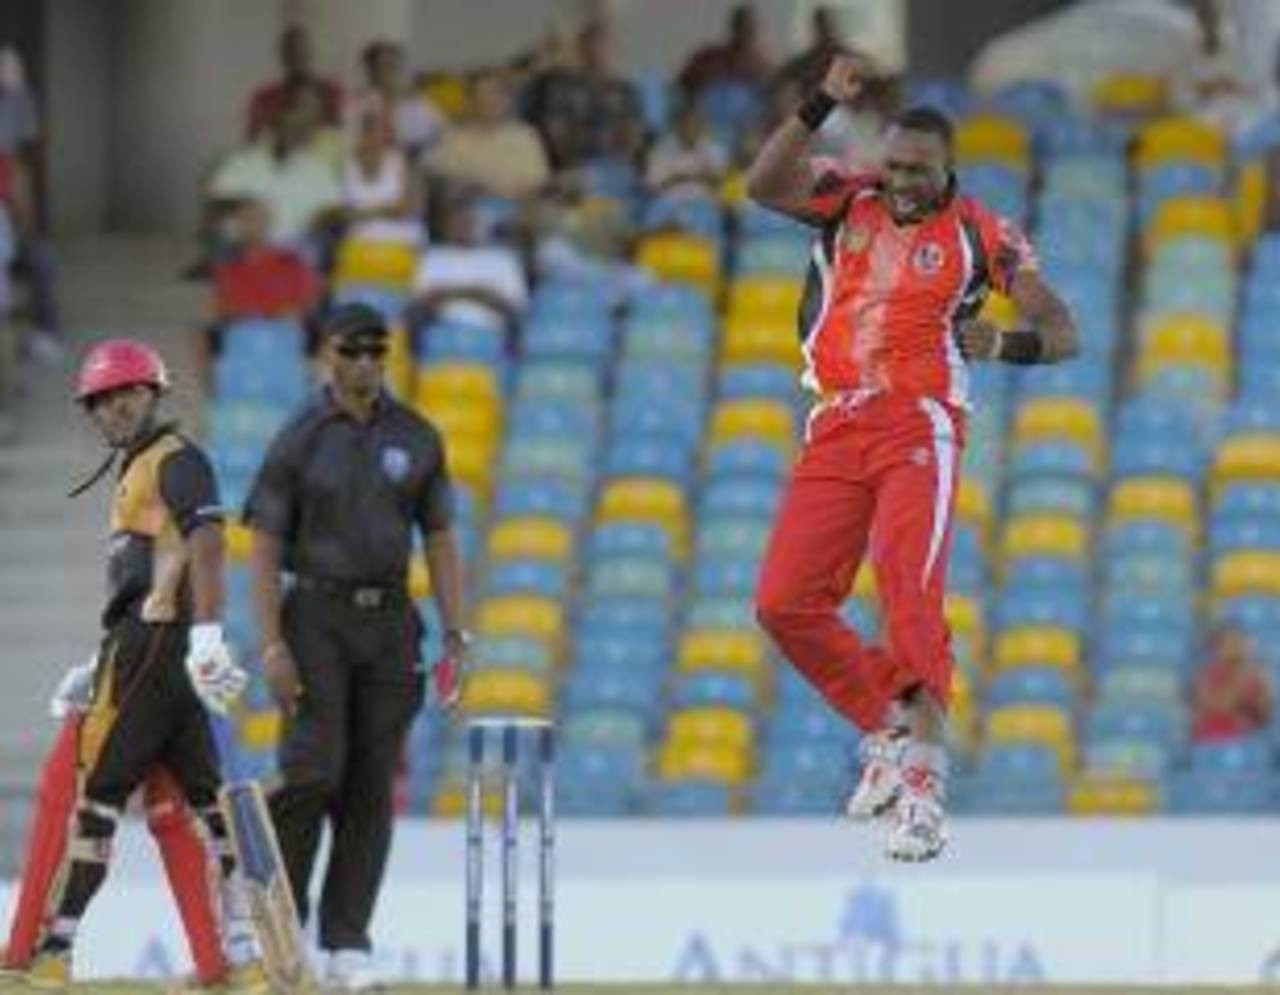 Dwayne Bravo celebrates one of his three wickets, Canada v Trinidad and Tobago, Caribbean T20 2011-12, Group A match, Barbados, January 19, 2012